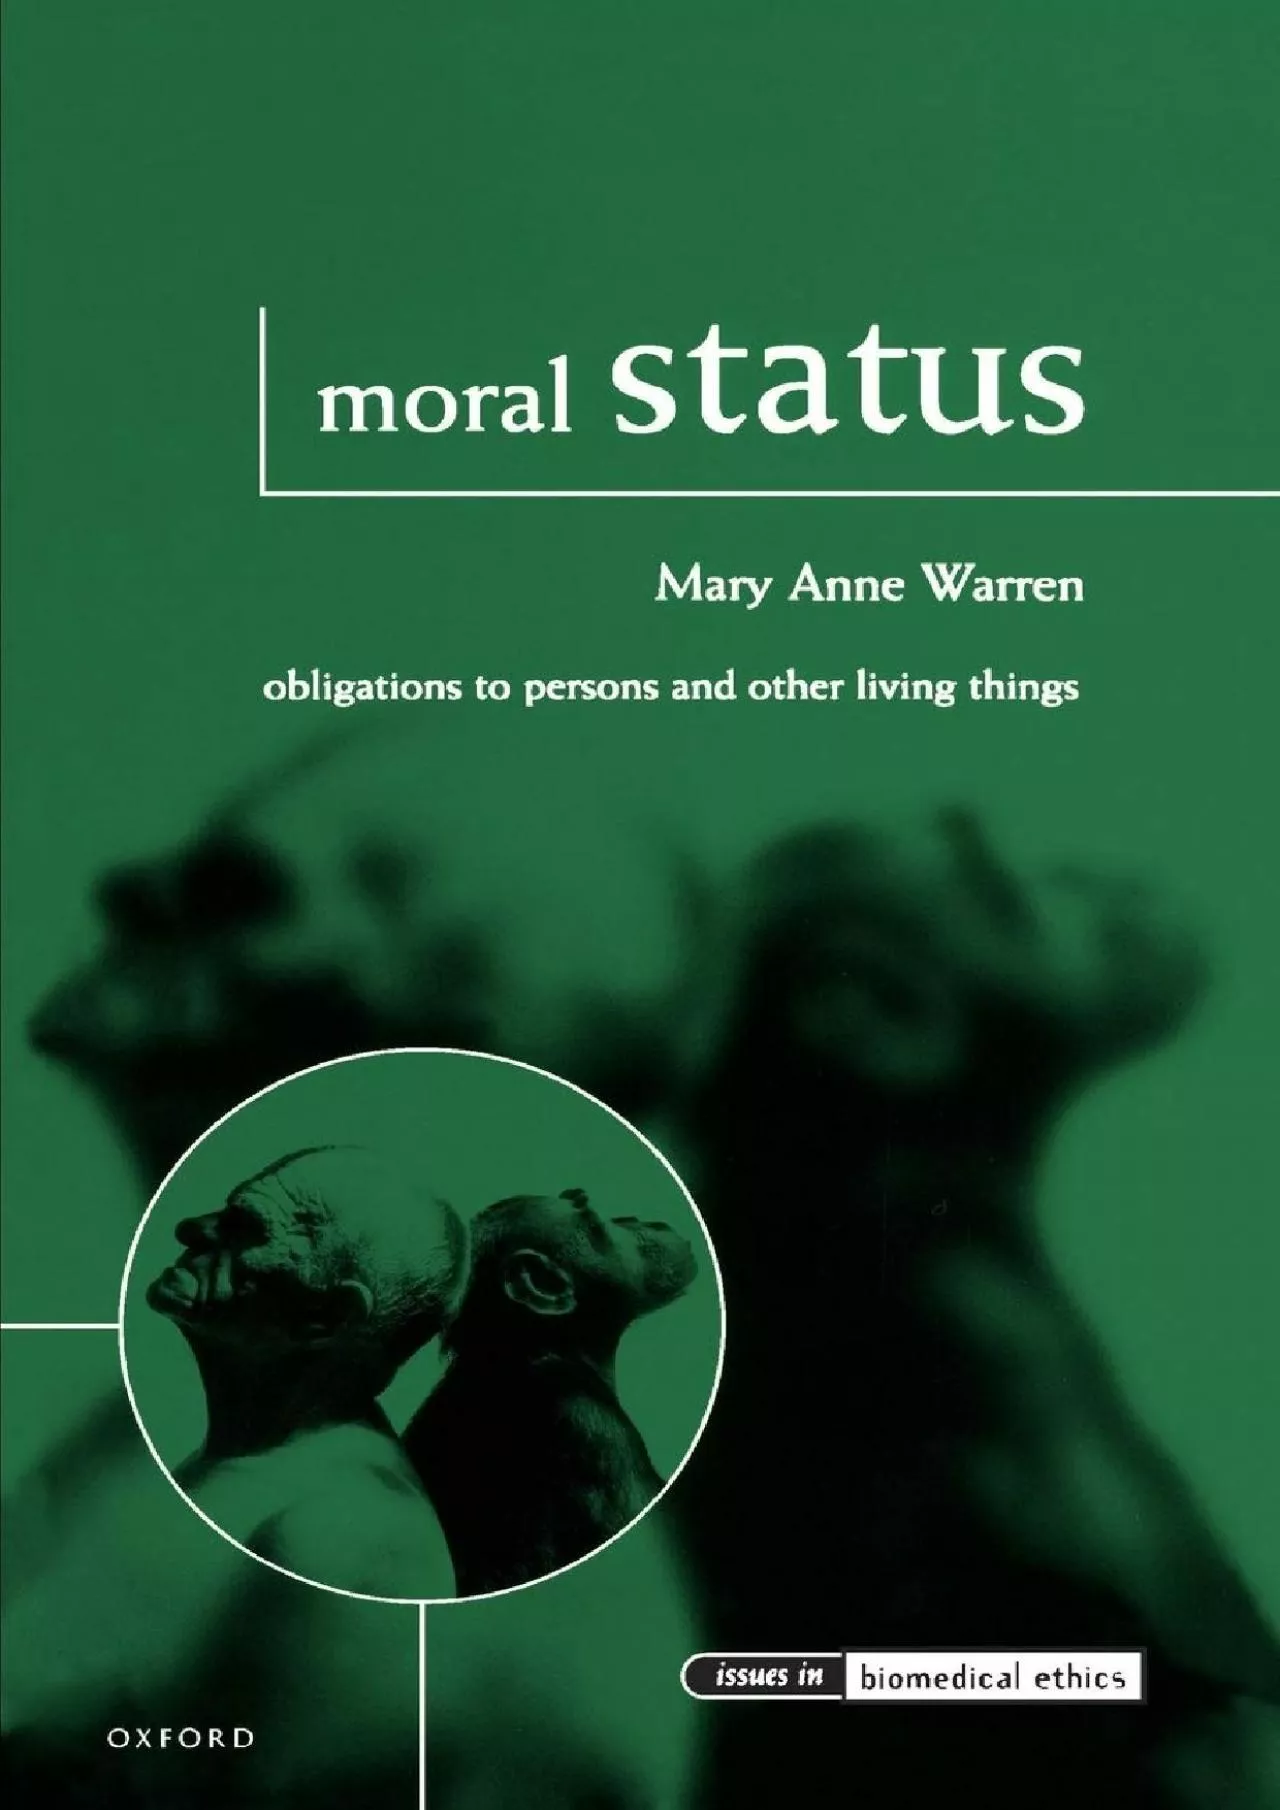 (DOWNLOAD)-Moral Status: Obligations to Persons and Other Living Things (Issues in Biomedical